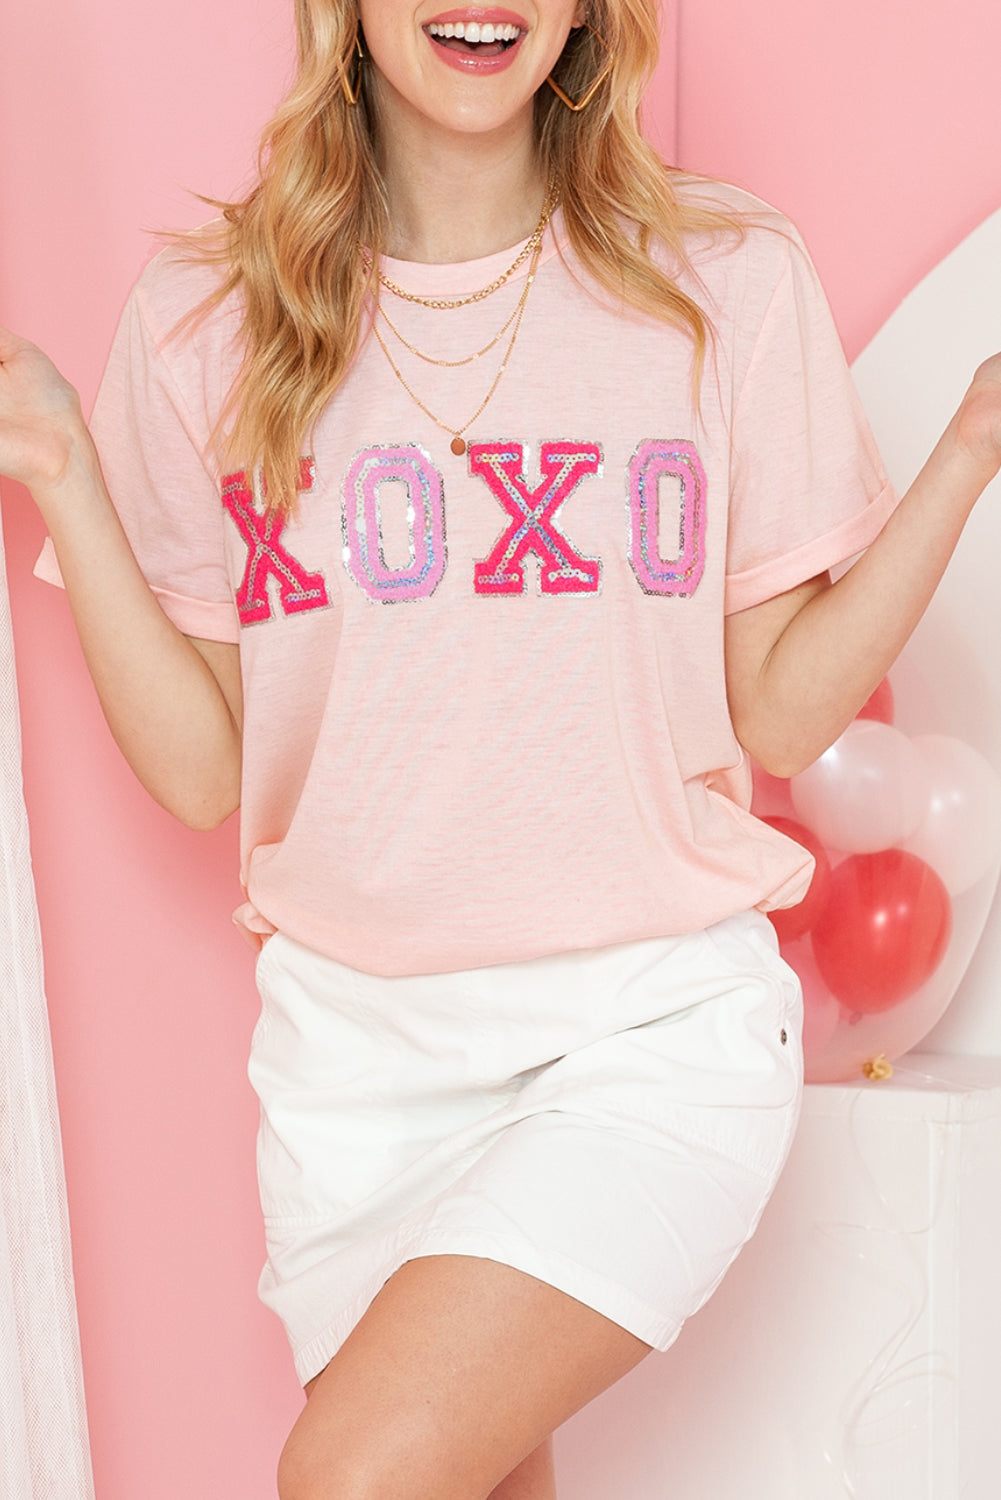 Pink XOXO Letter Printed Roll Up Sleeve Graphic Tee